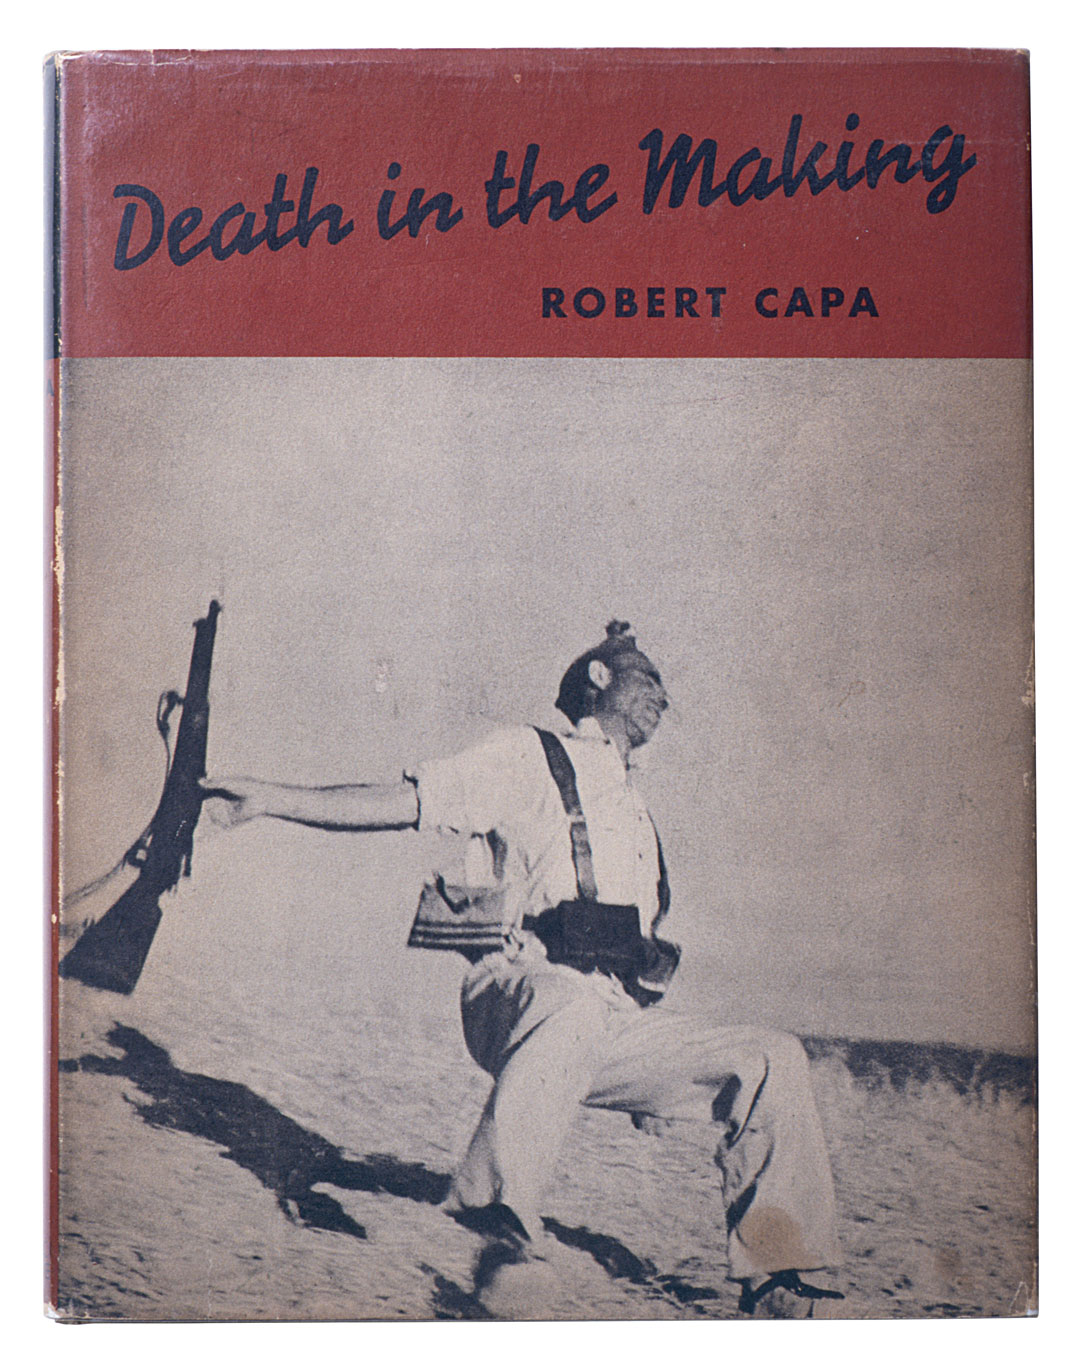 Robert Capa, Death in the Making, published by Covici-Friede, New York, 1938. As featured in Magnum Photobook: The Catalogue Raisonné